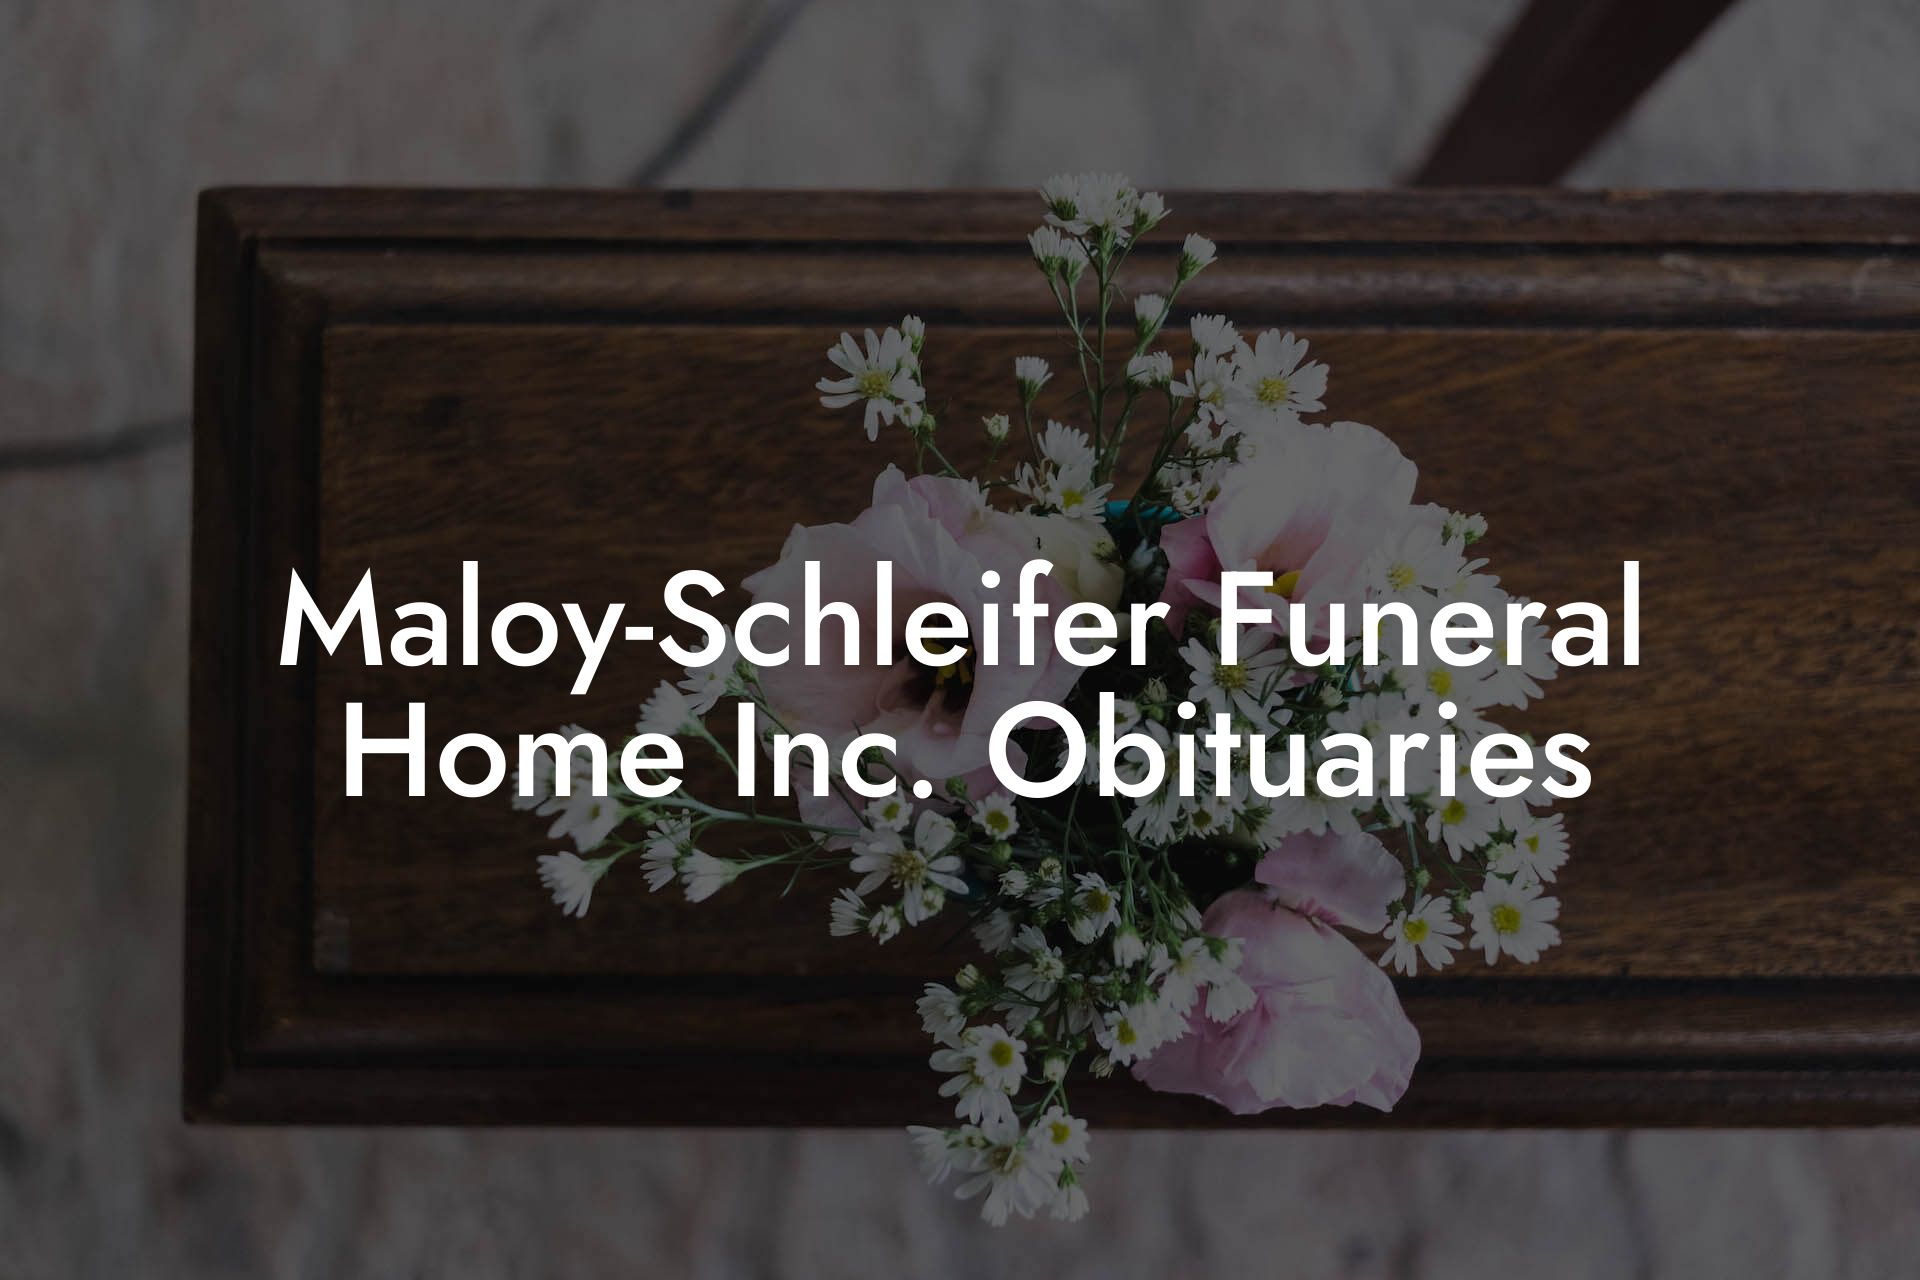 Maloy-Schleifer Funeral Home Inc. Obituaries